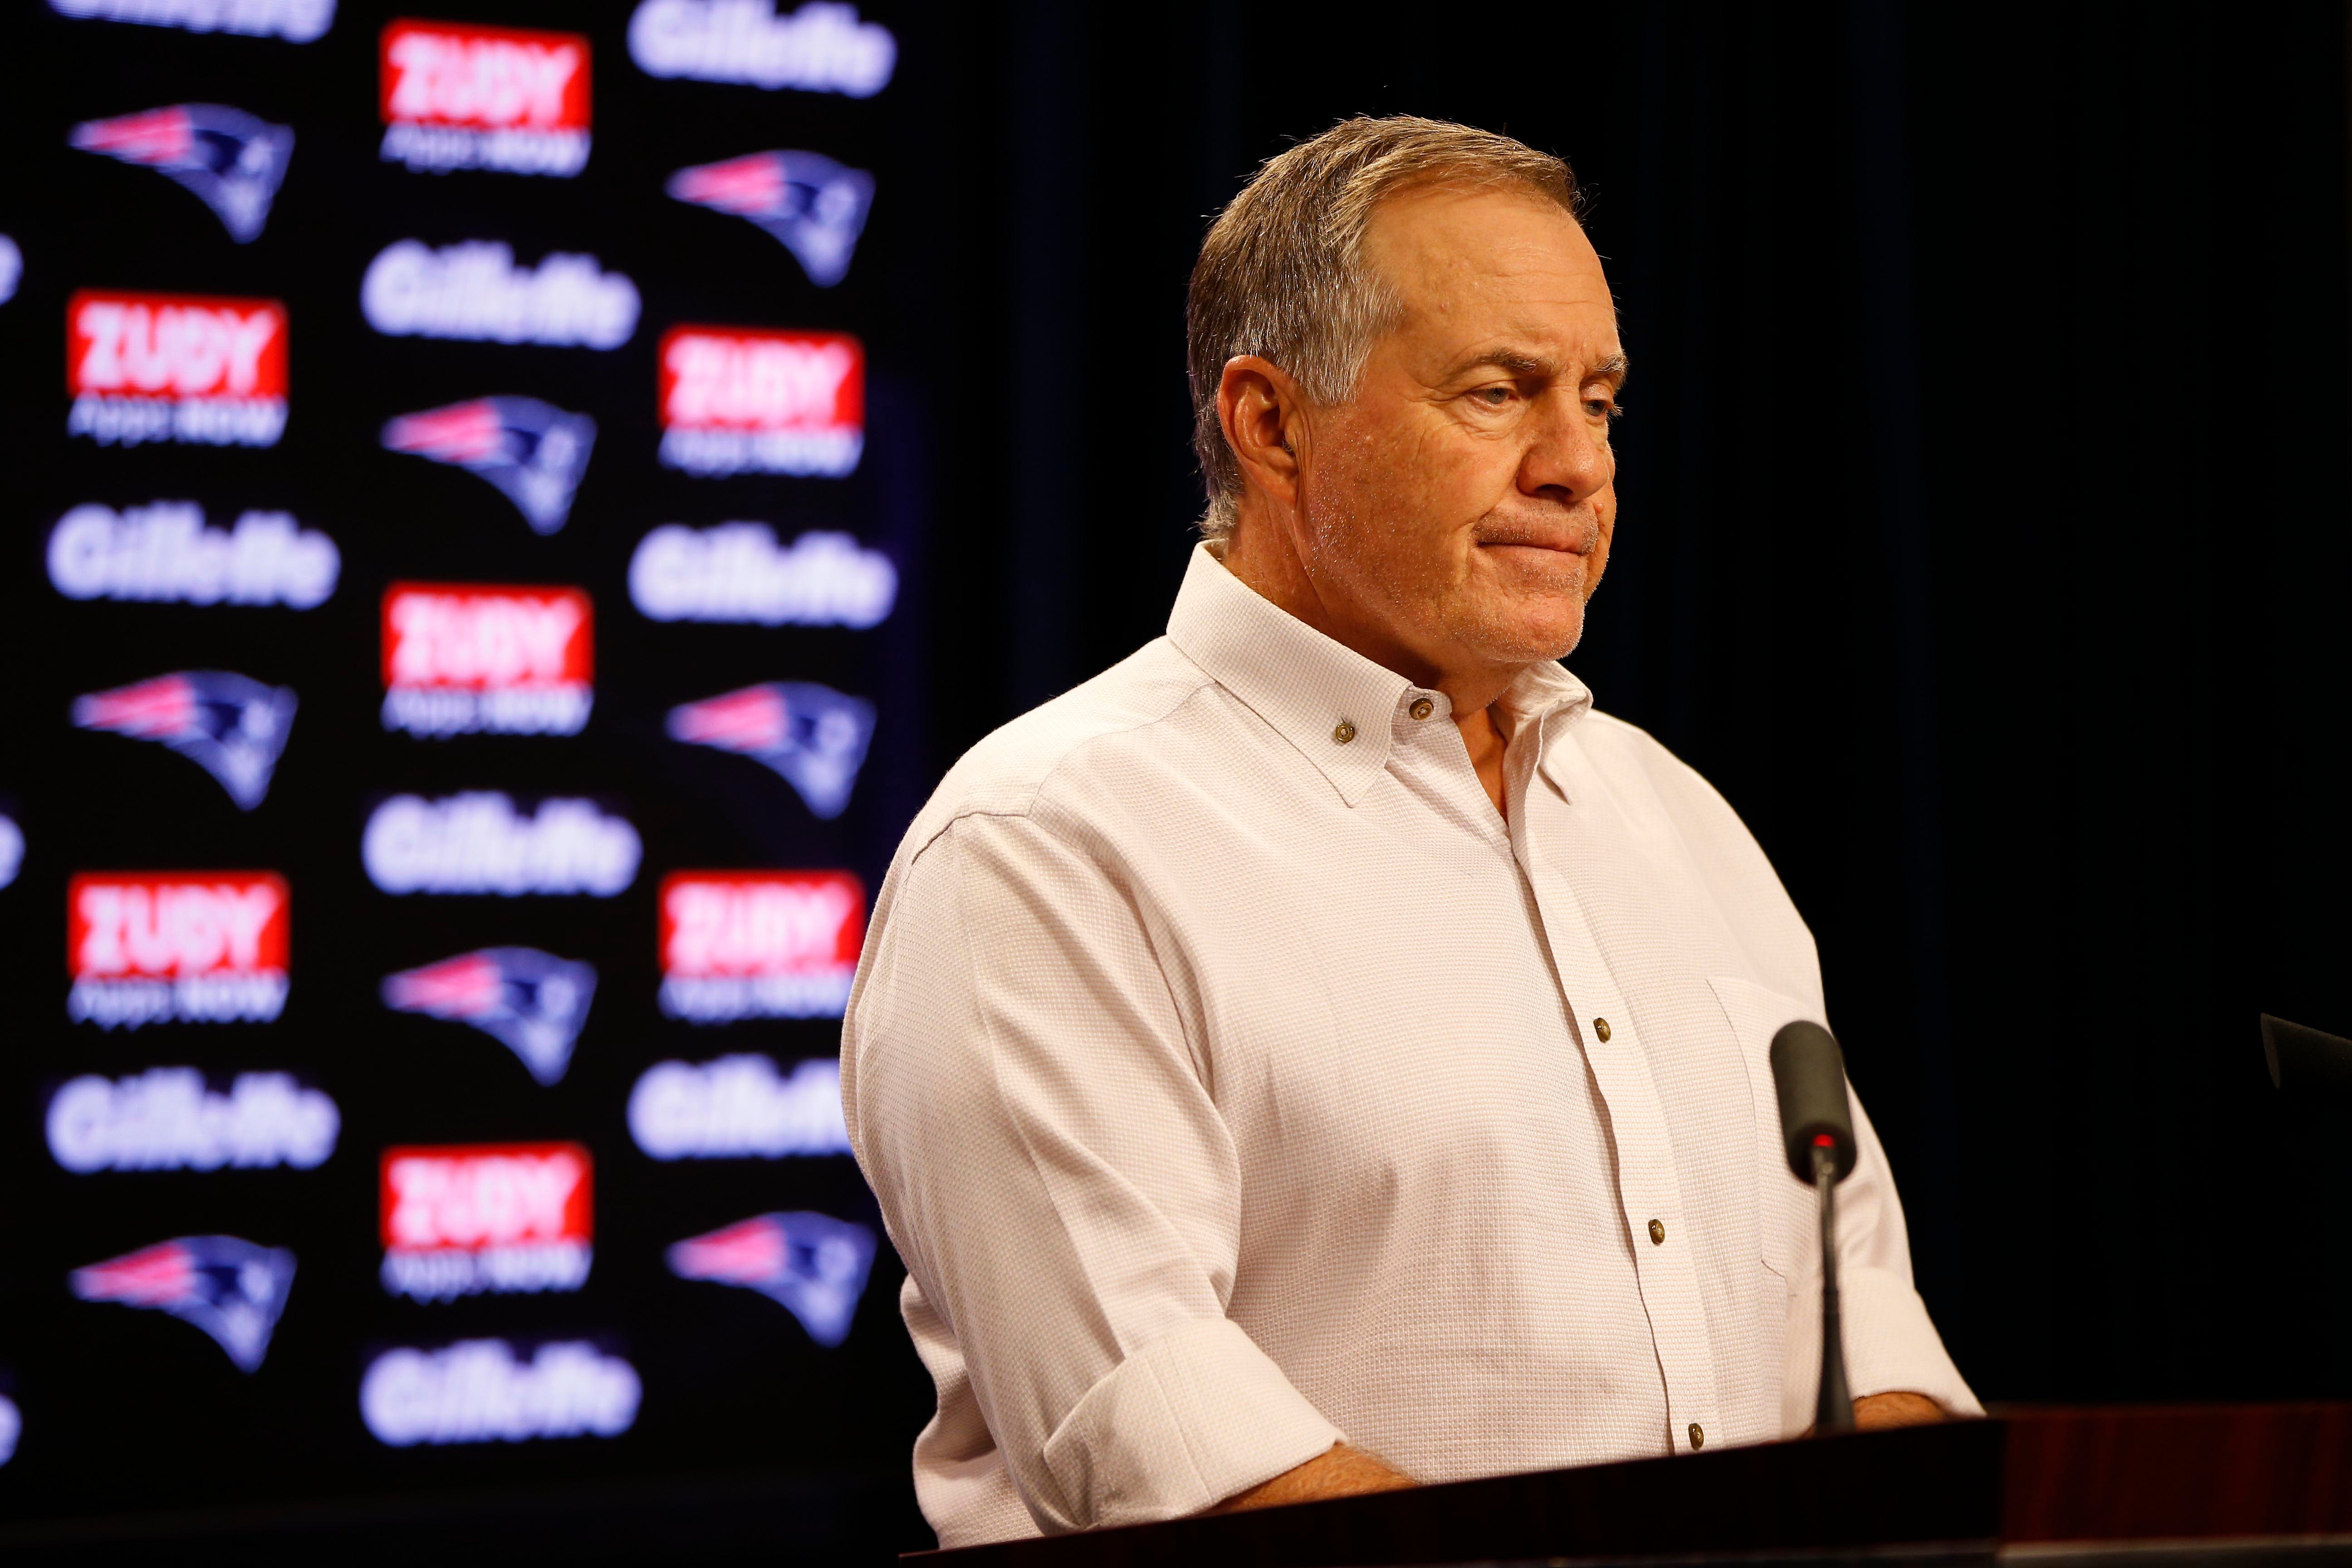 New England Patriots coach Bill Belichick leaves press conference after five Antonio Brown questions